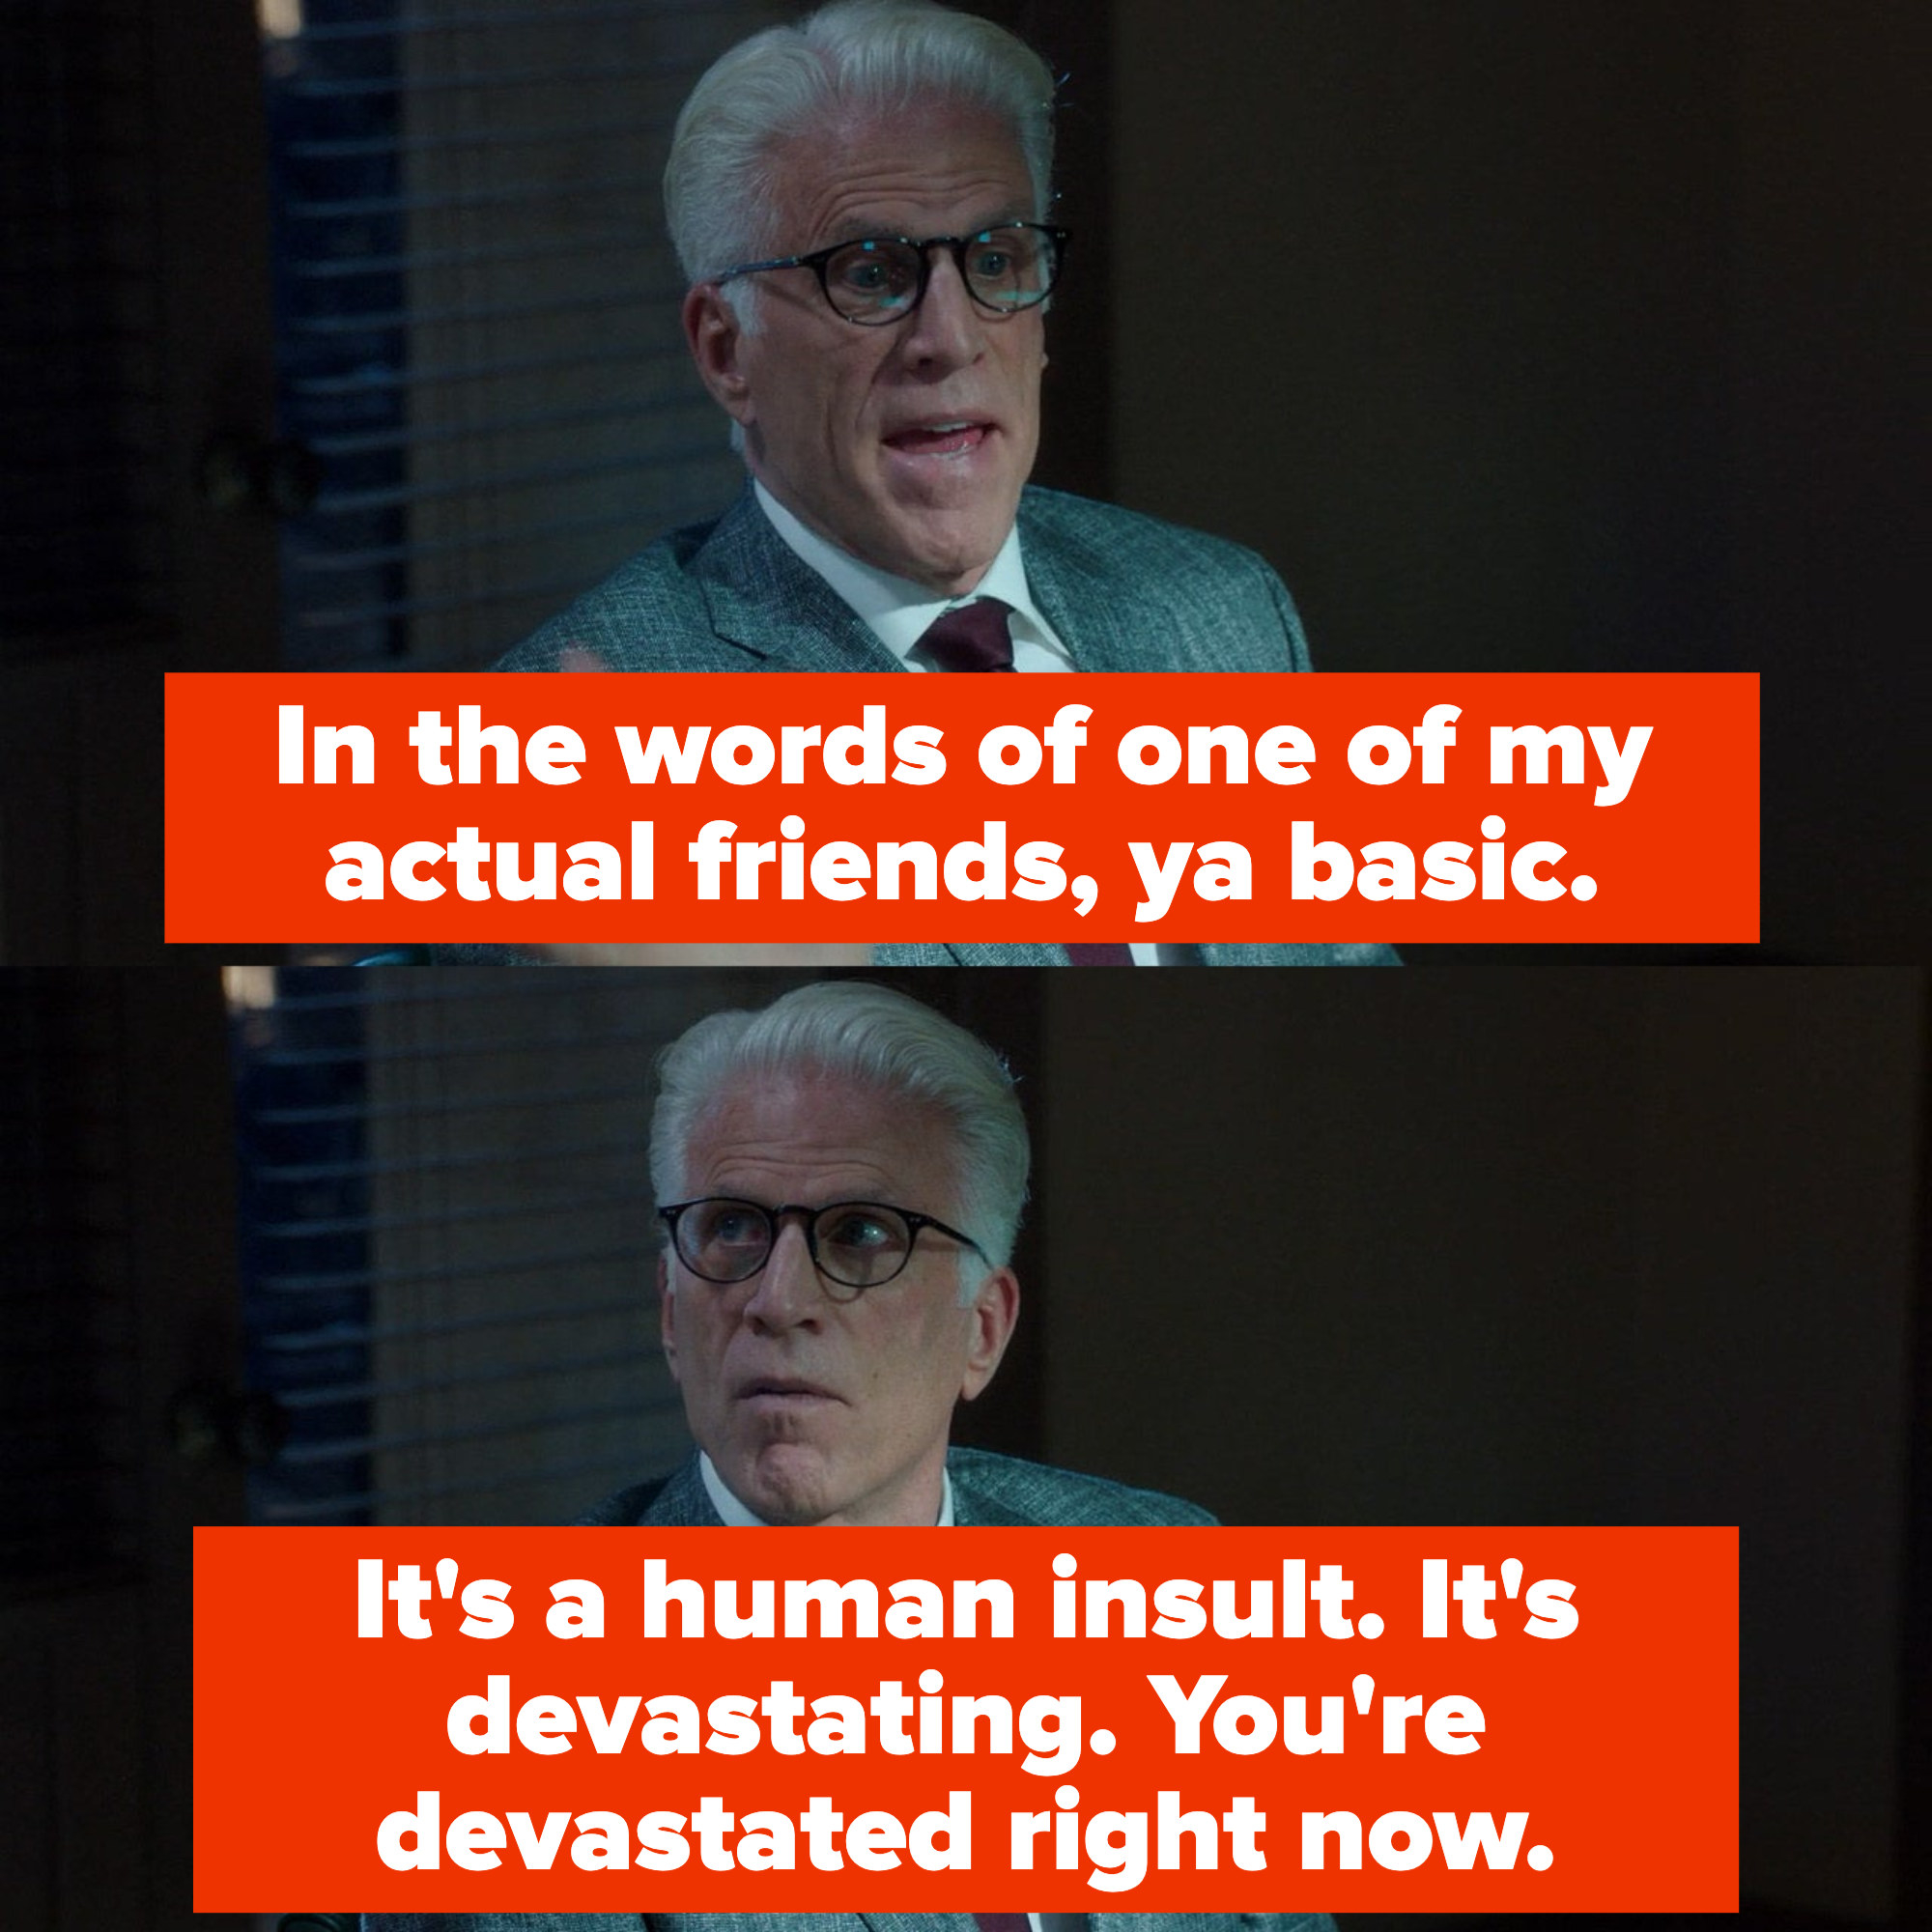 &quot;In the words of one of my actual friends, ya basic. It&#x27;s a human insult. It&#x27;s devastating. You&#x27;re devastated right now&quot;